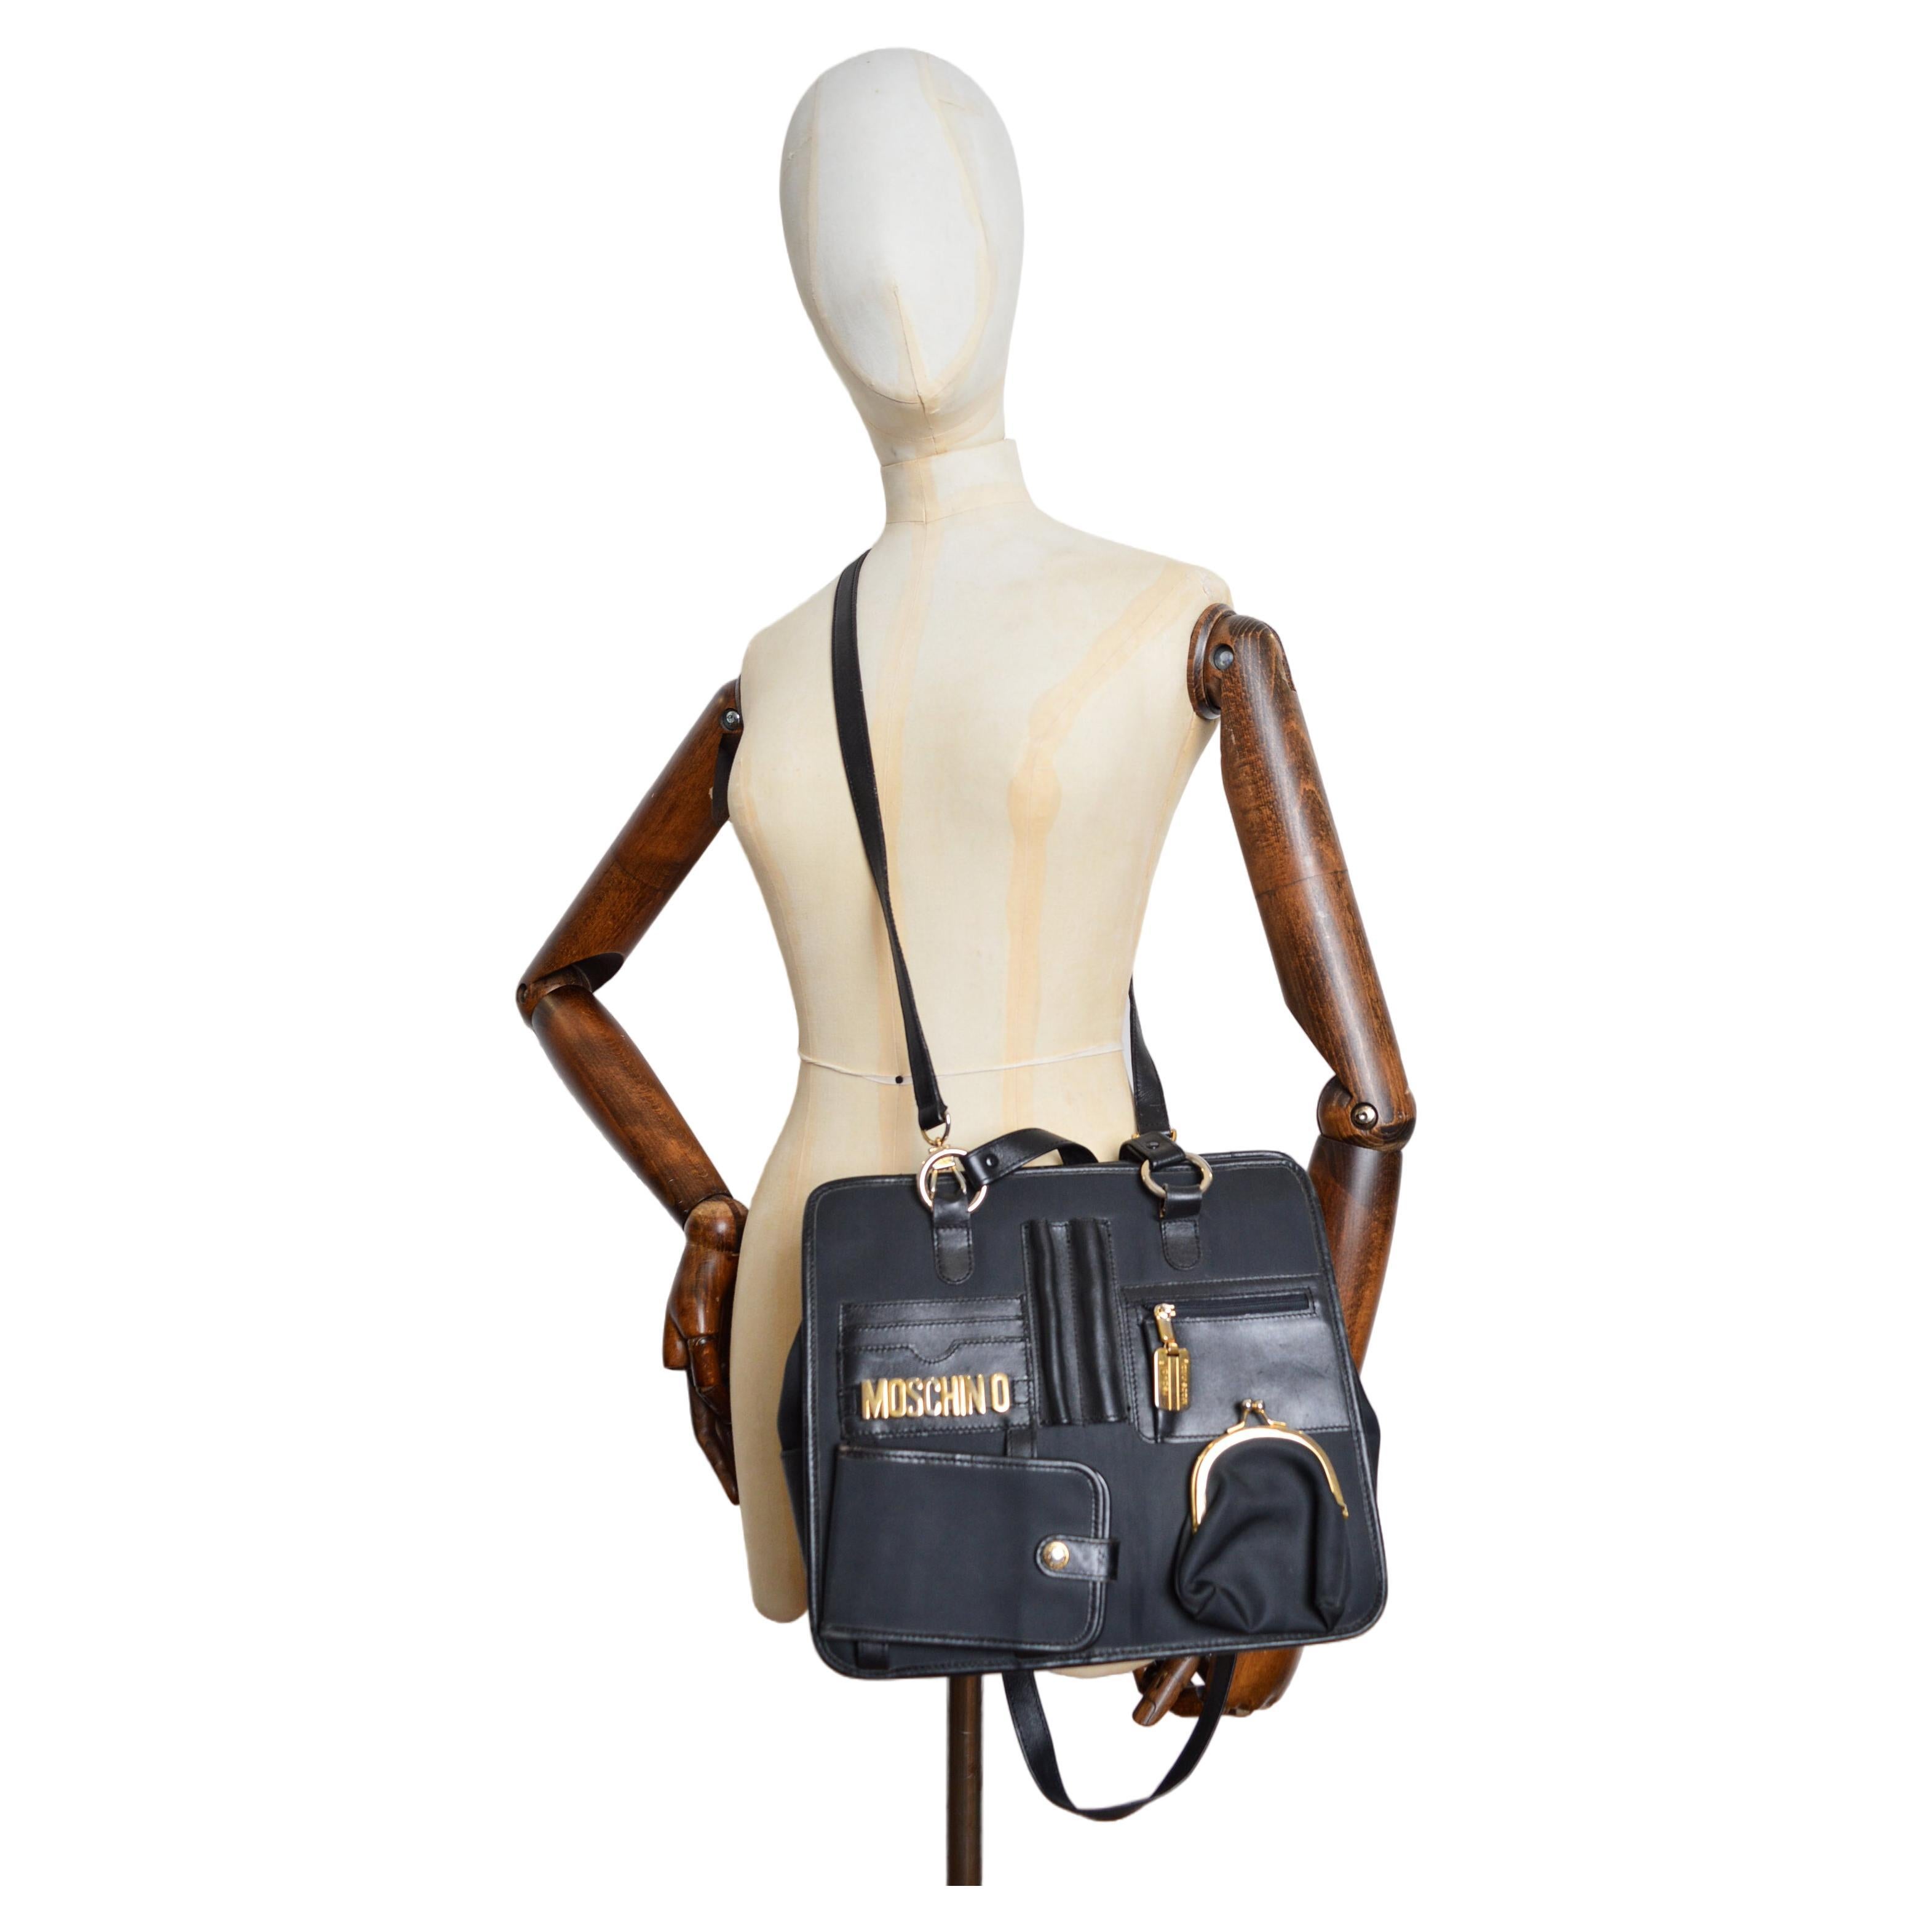 A Superb, archival Vintage Moschino Bag circa 1990 constructed from a Black Nylon cloth with Black leather trim and Gold tone metal hardware details, produced by REDWALL.  

MADE IN ITALY.  

Features ; Two shoulder strap handles, Detachable body